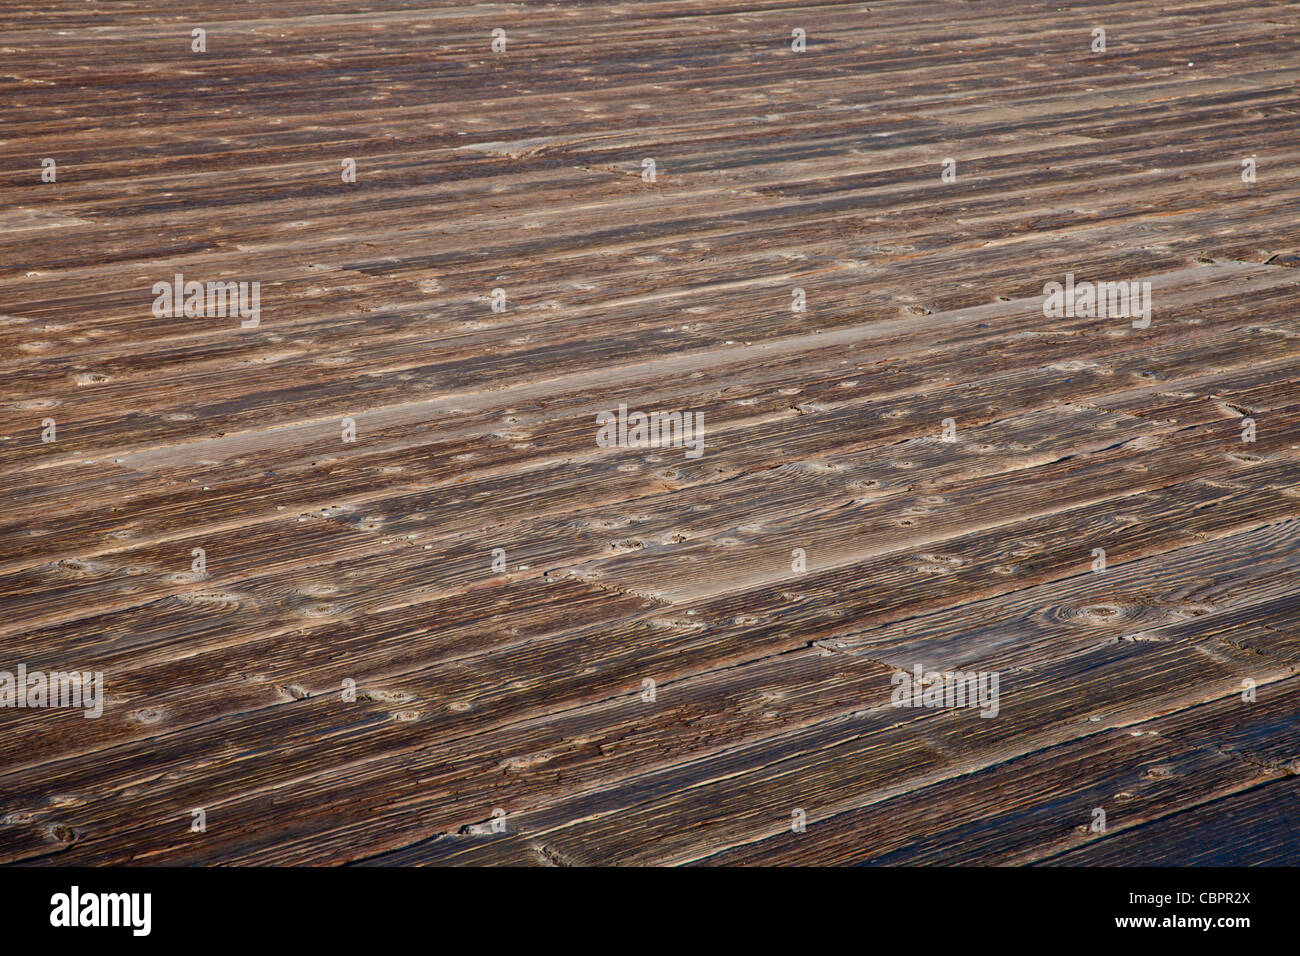 rough weathered wooden deck with diagonal plank pattern Stock Photo